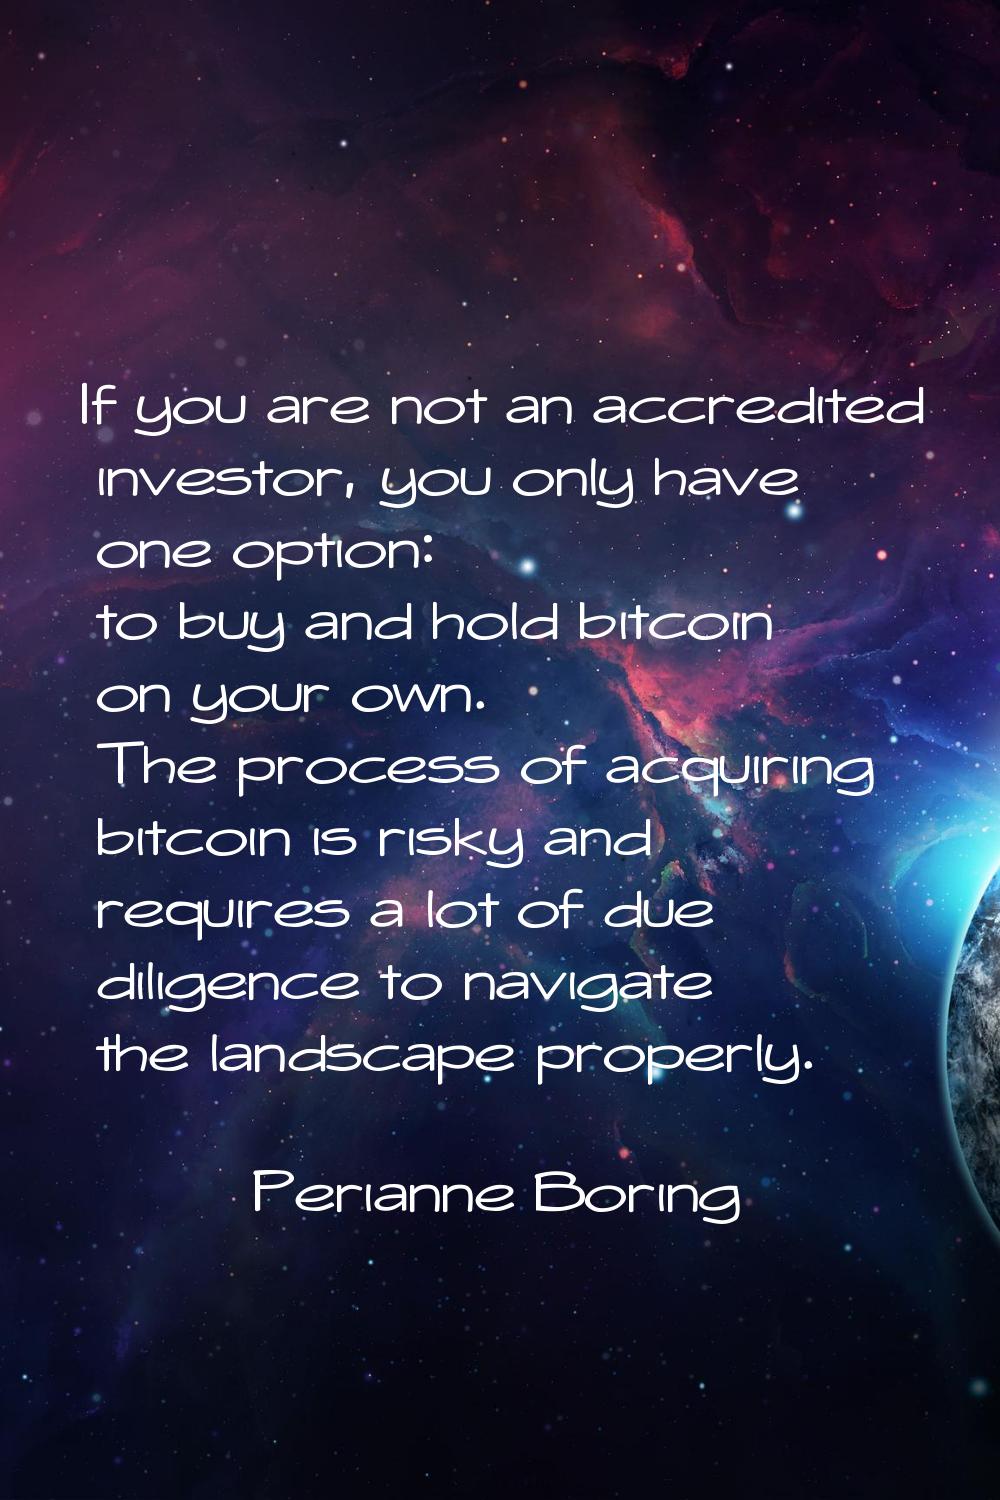 If you are not an accredited investor, you only have one option: to buy and hold bitcoin on your ow